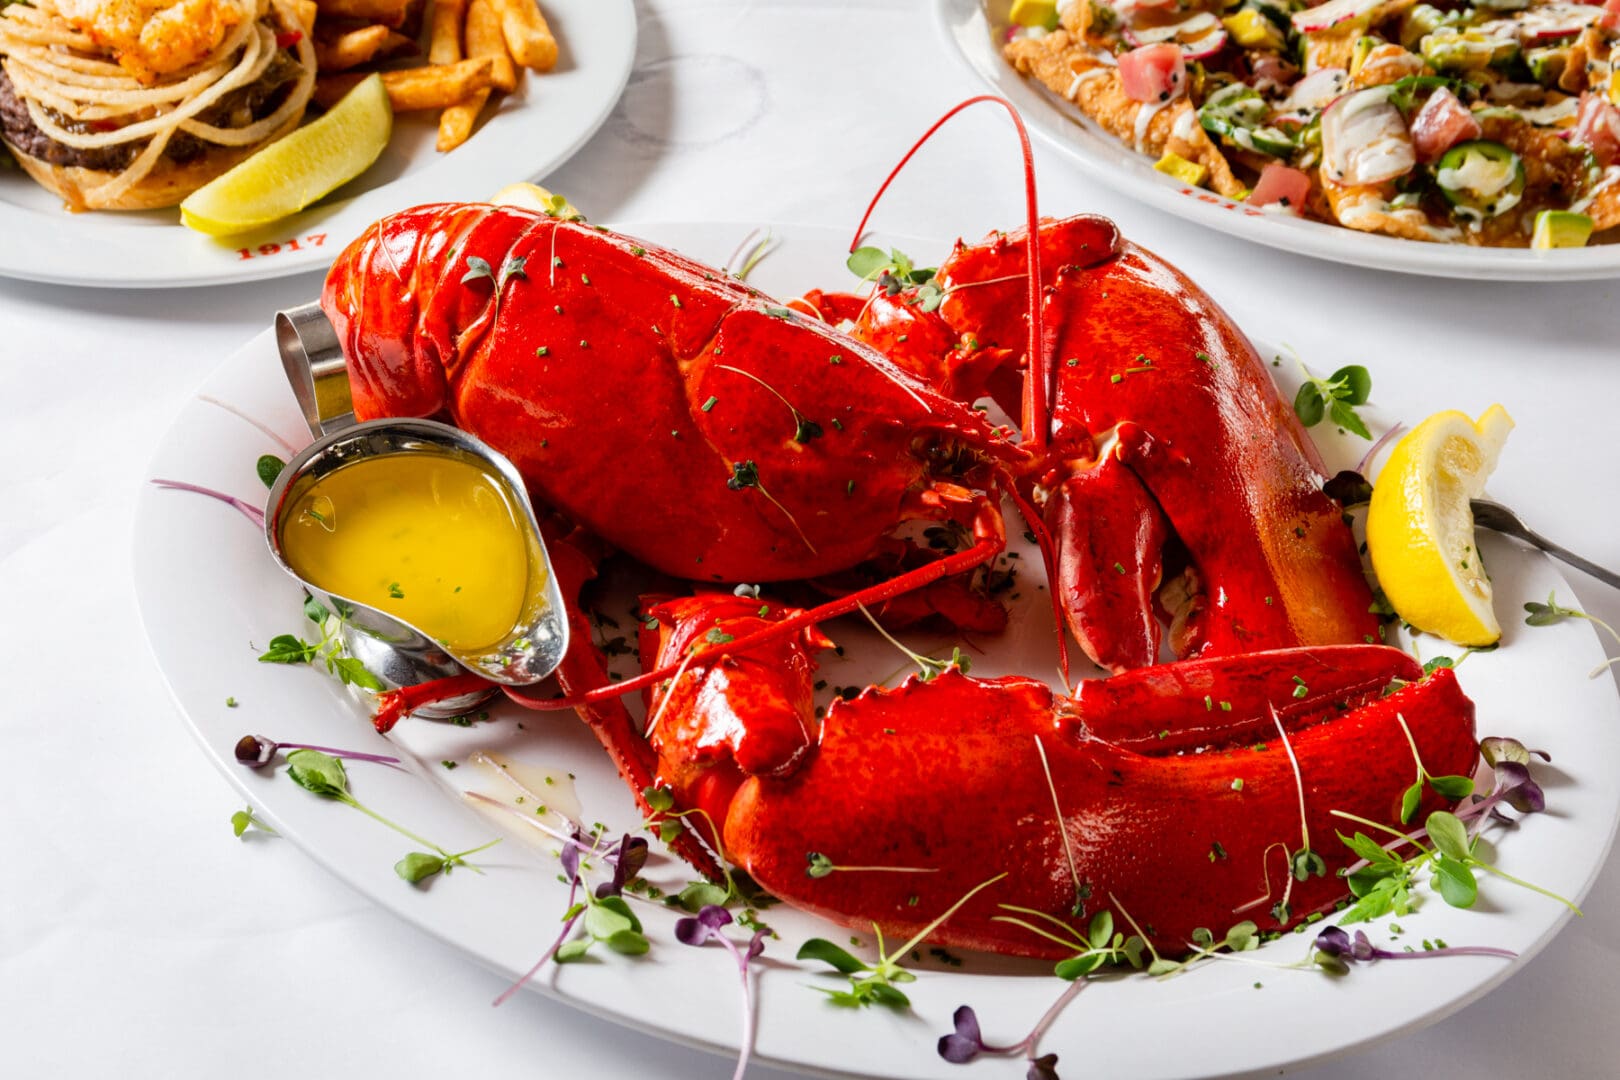 A Lobster in a Plate With Butter Sauce